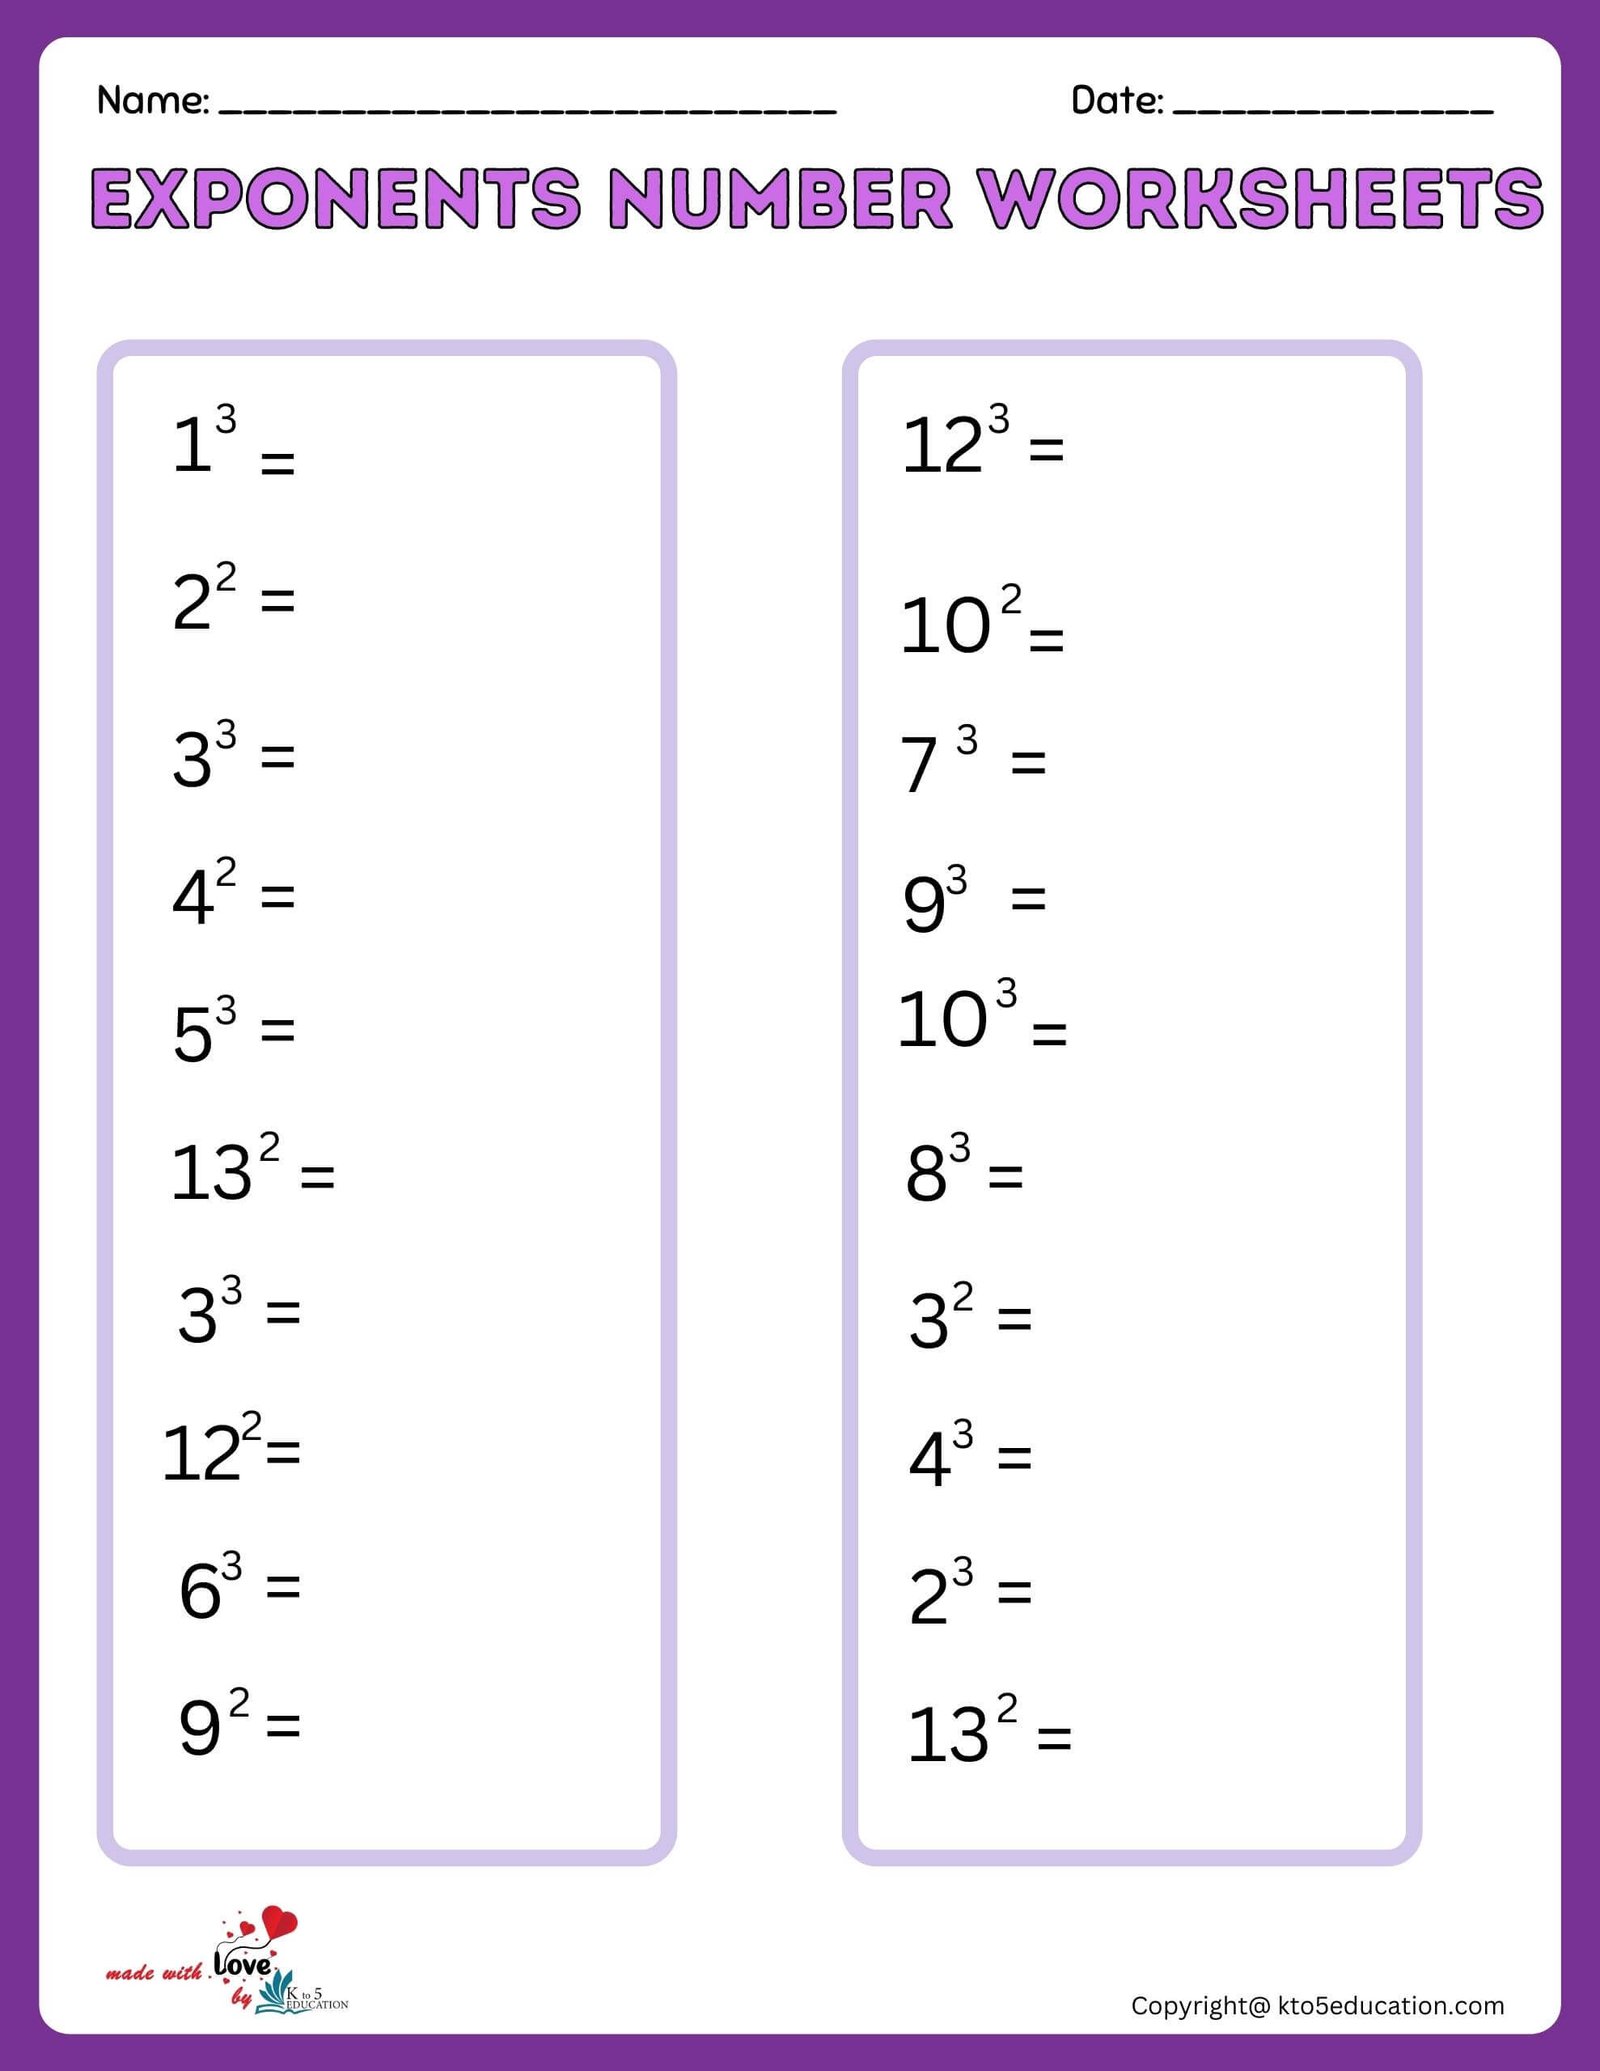 Exponents Worksheet For Second And Third Power